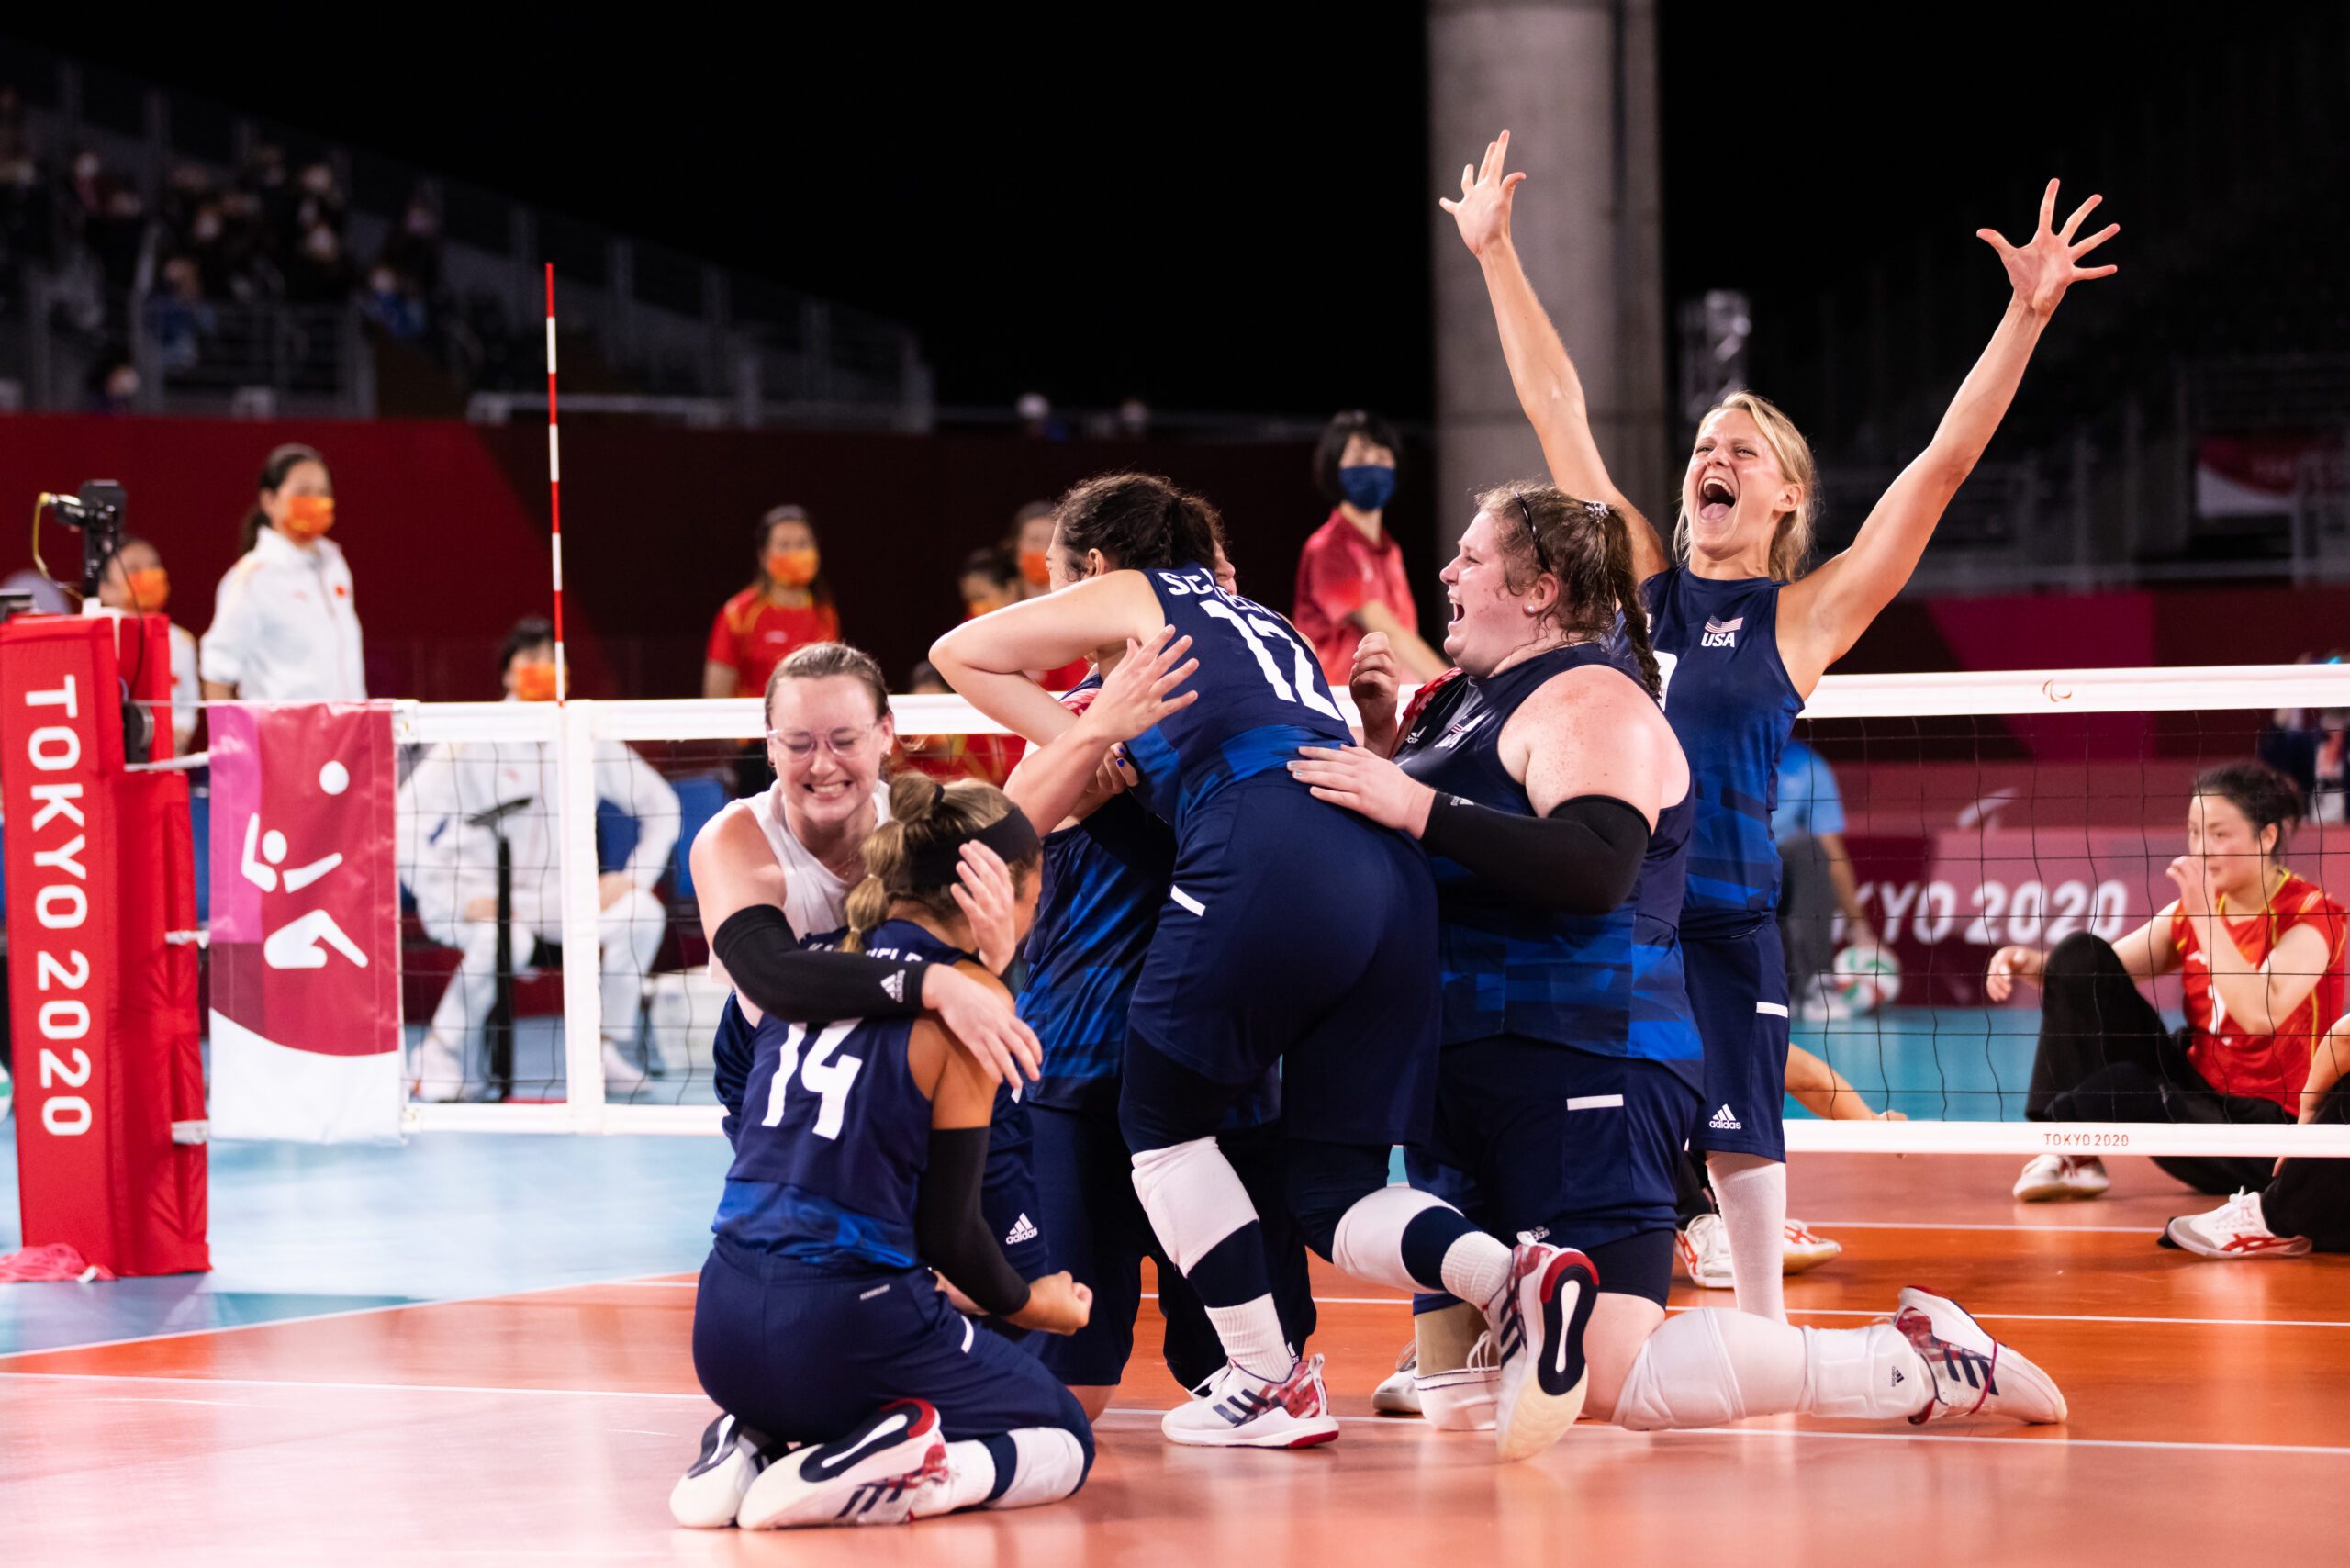 The U.S. women's sitting national team celebrates and hugs on a volleyball court in front of a net.